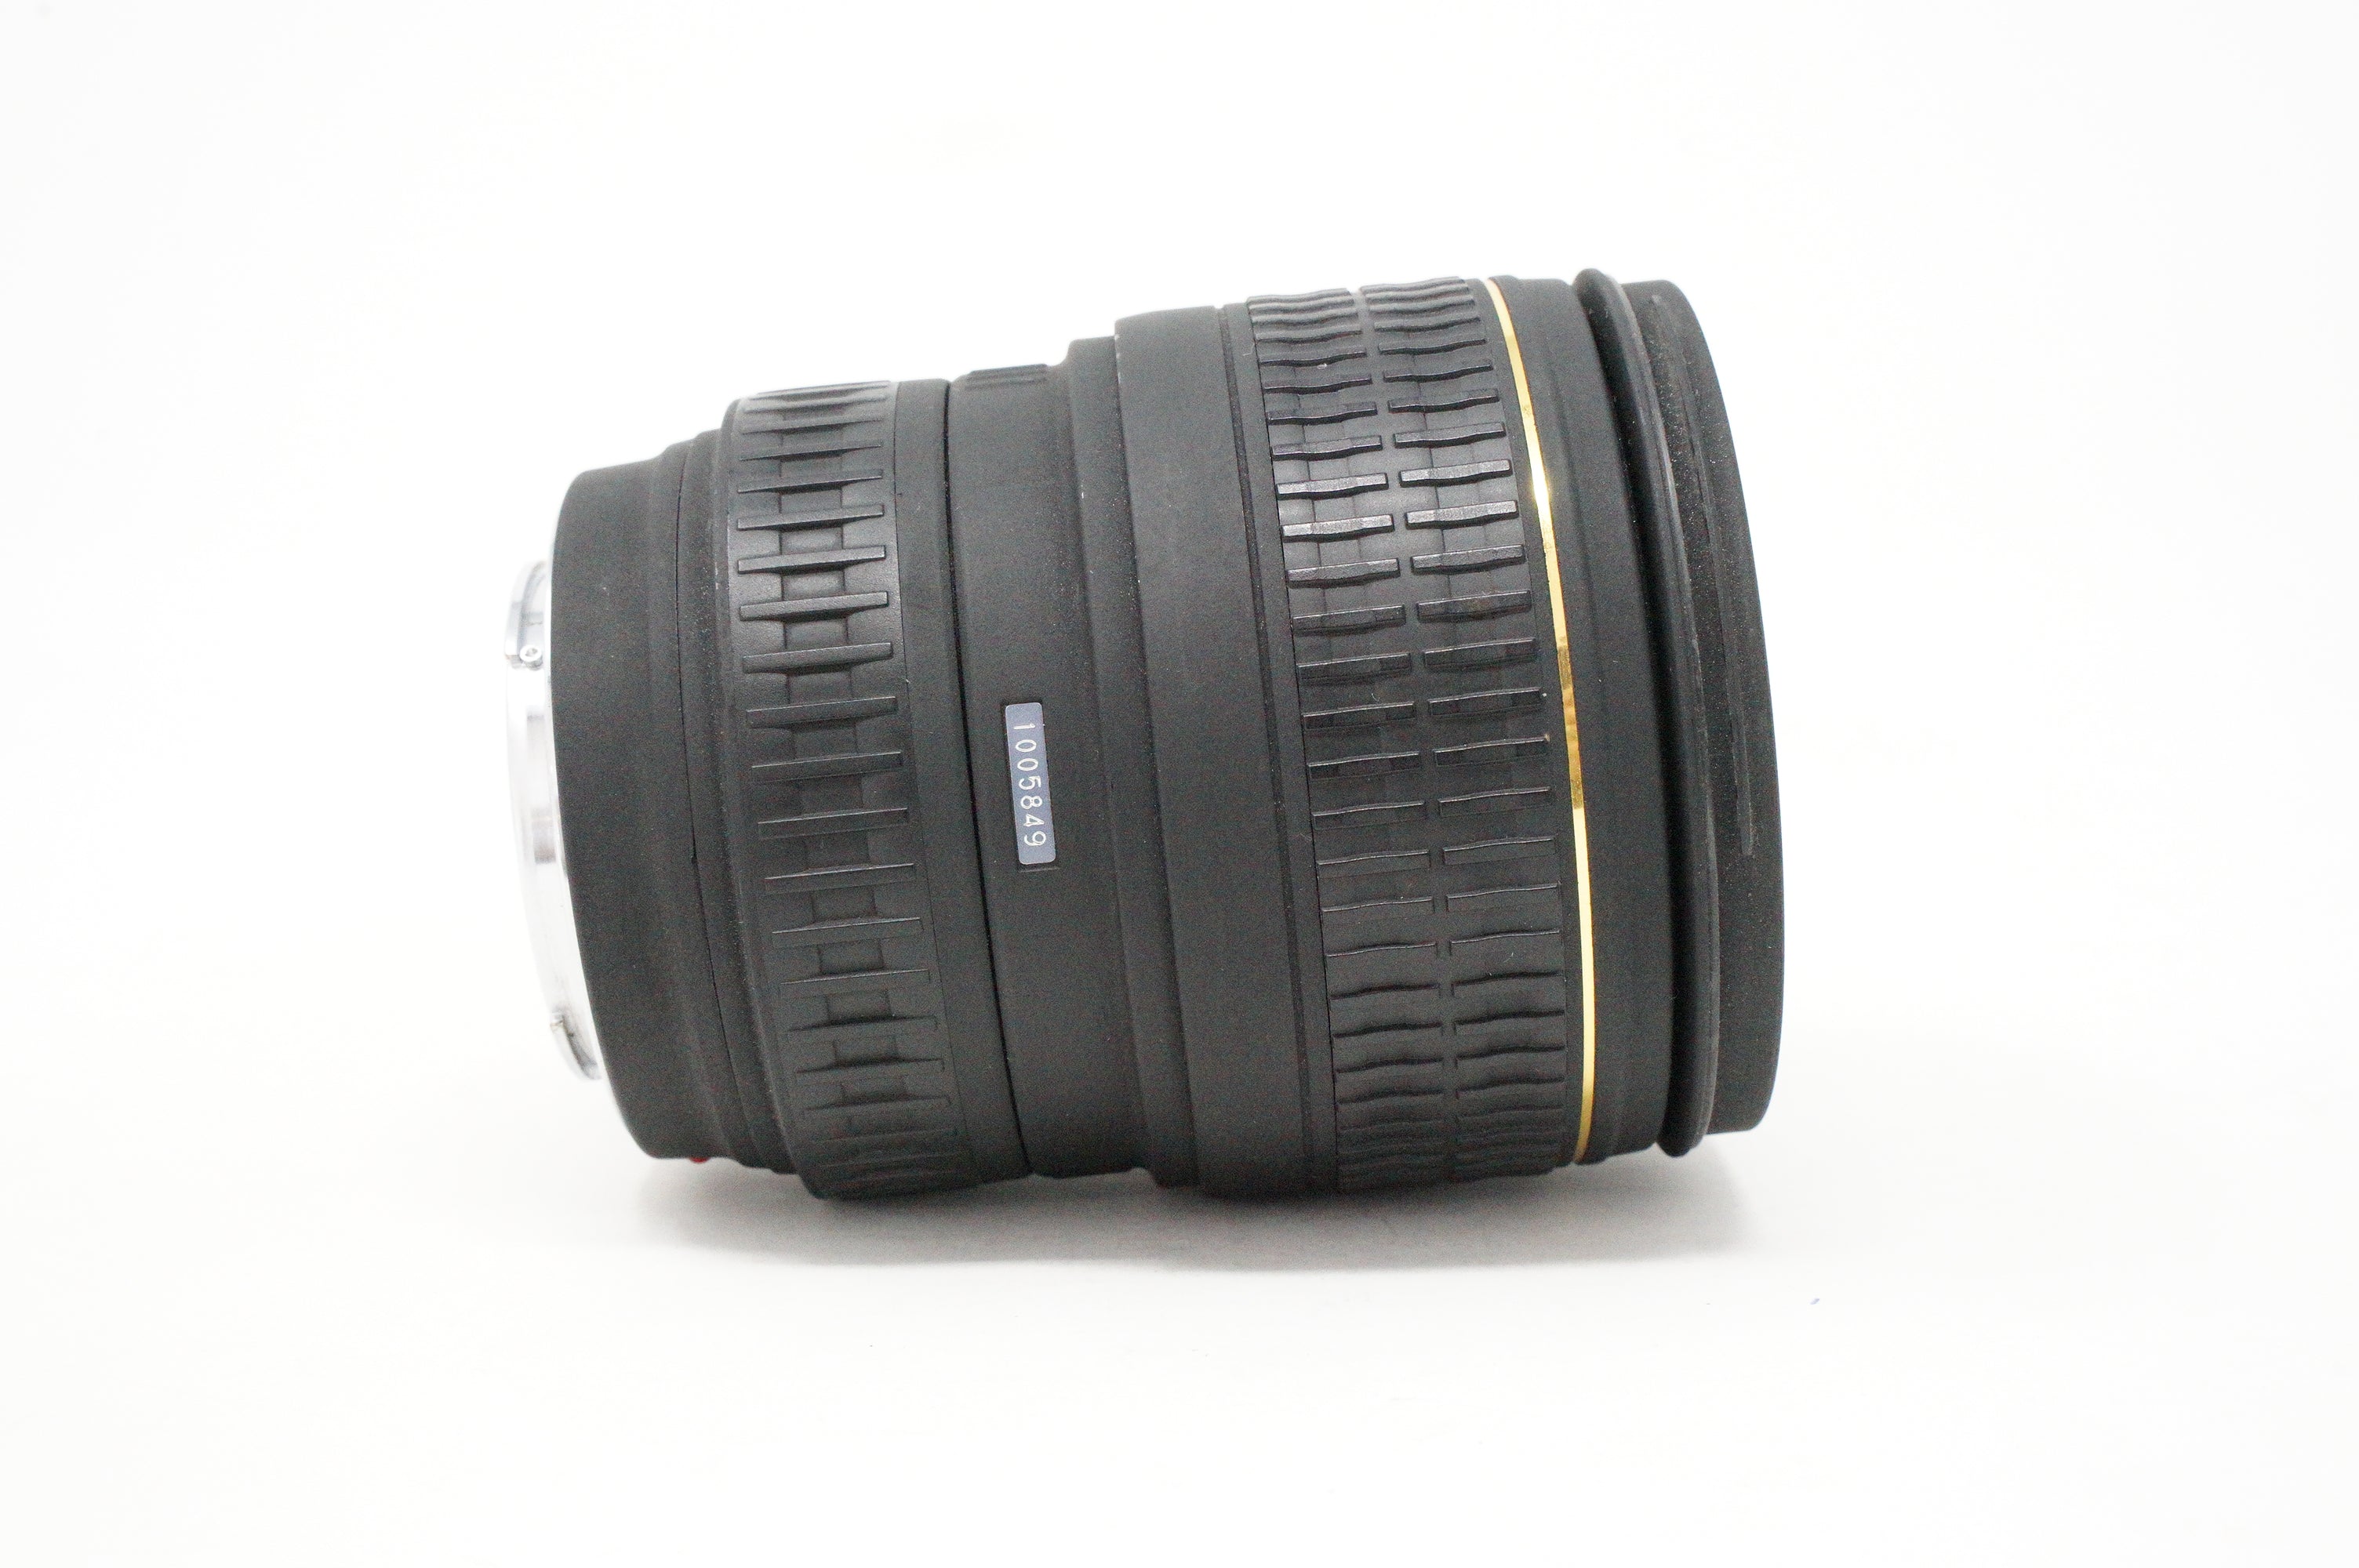 Used Sigma EX 28-70mm F/2.8 DF lens for Sony A-Mount (SH39261)